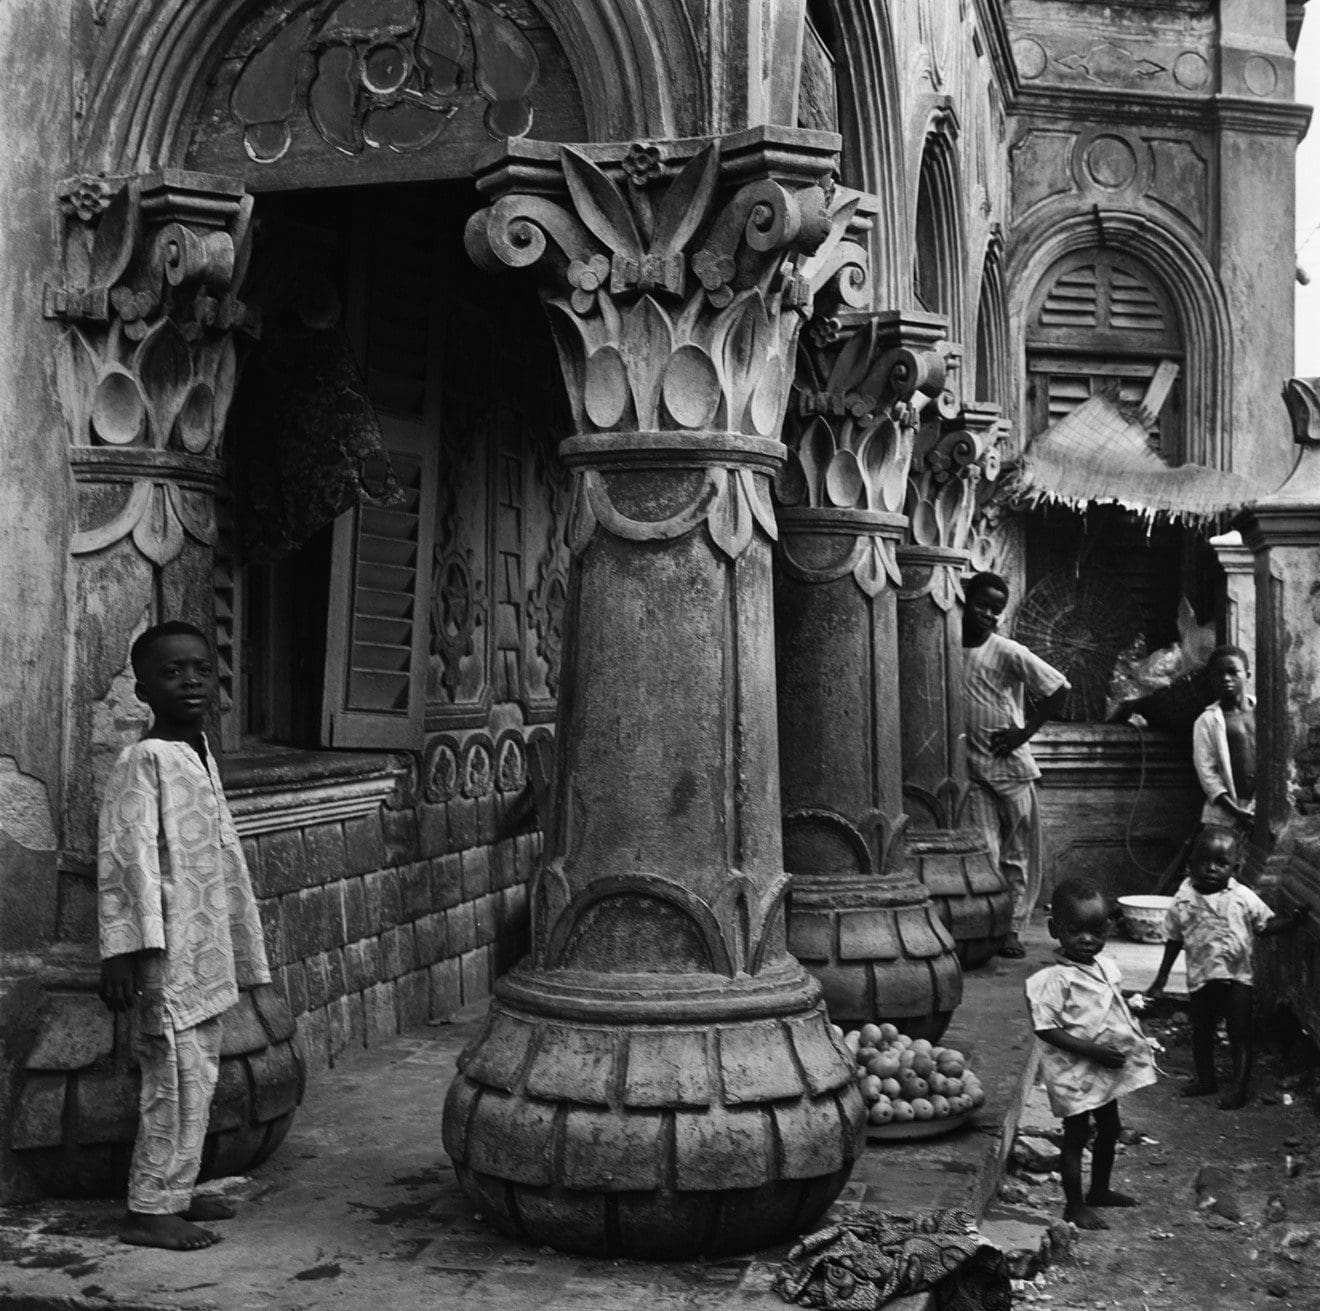 Children in the foreground surrounding an ornate column.